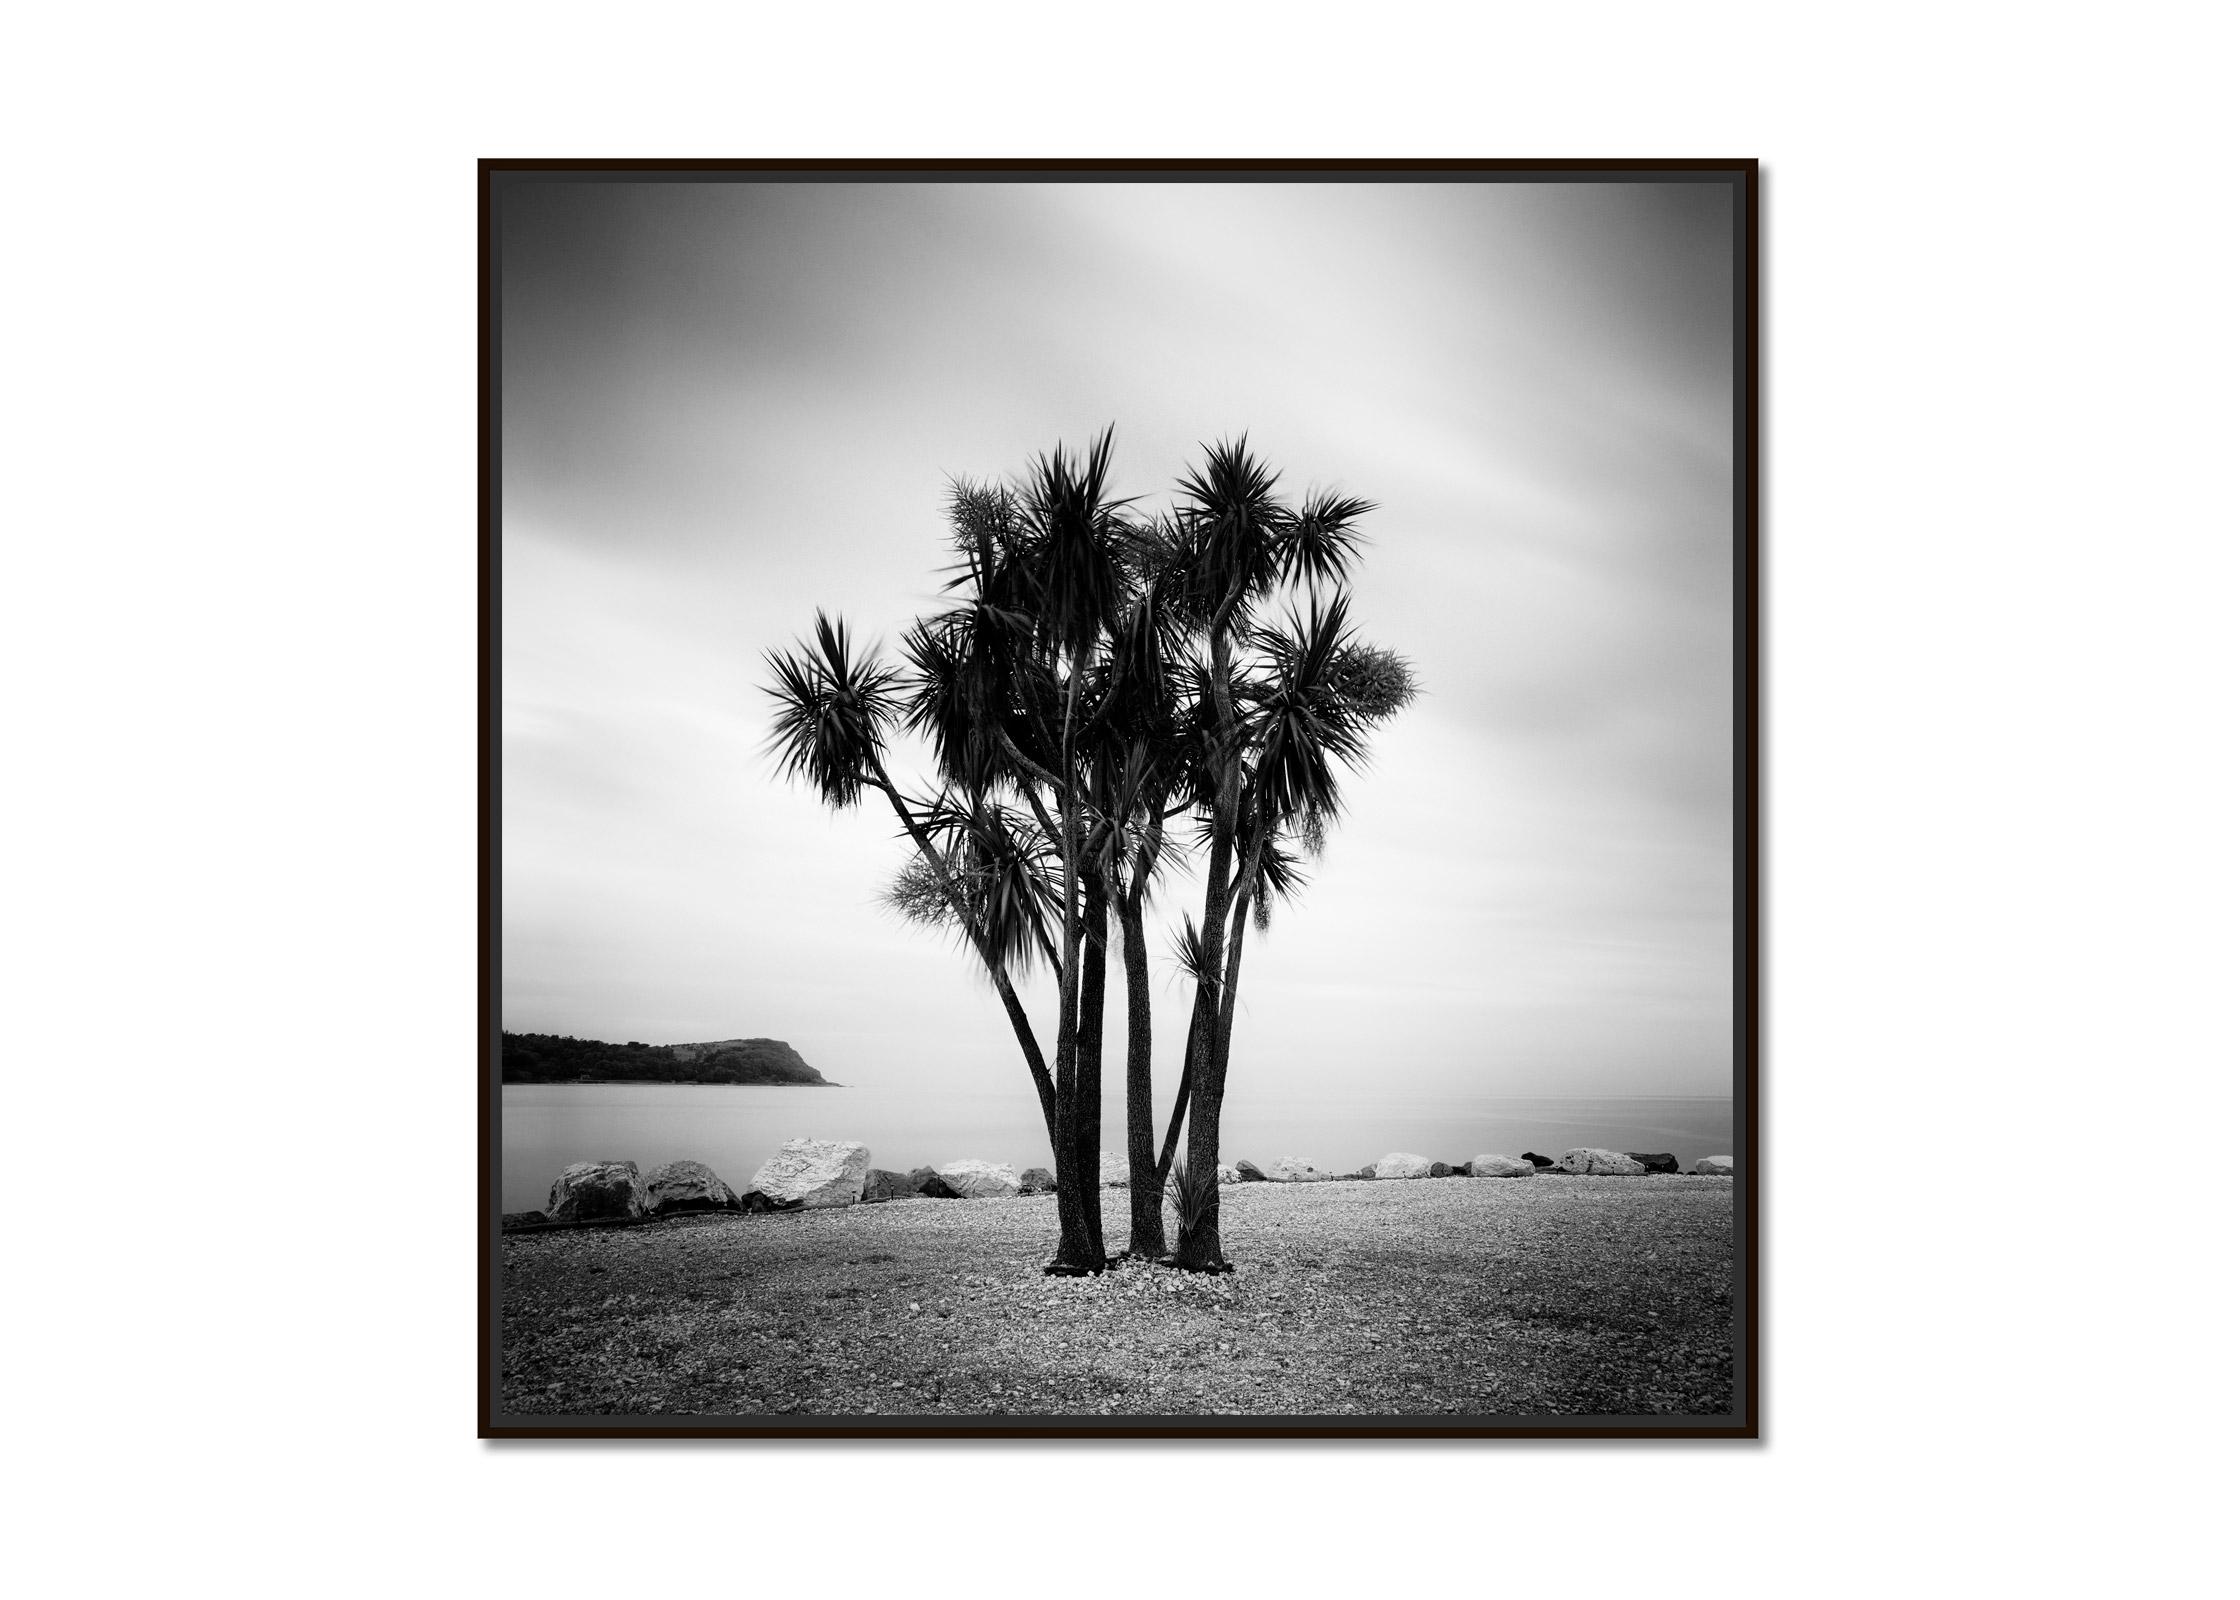 Caribbean Feeling, Palm Trees, Ireland, black and white landscape photography - Photograph by Gerald Berghammer